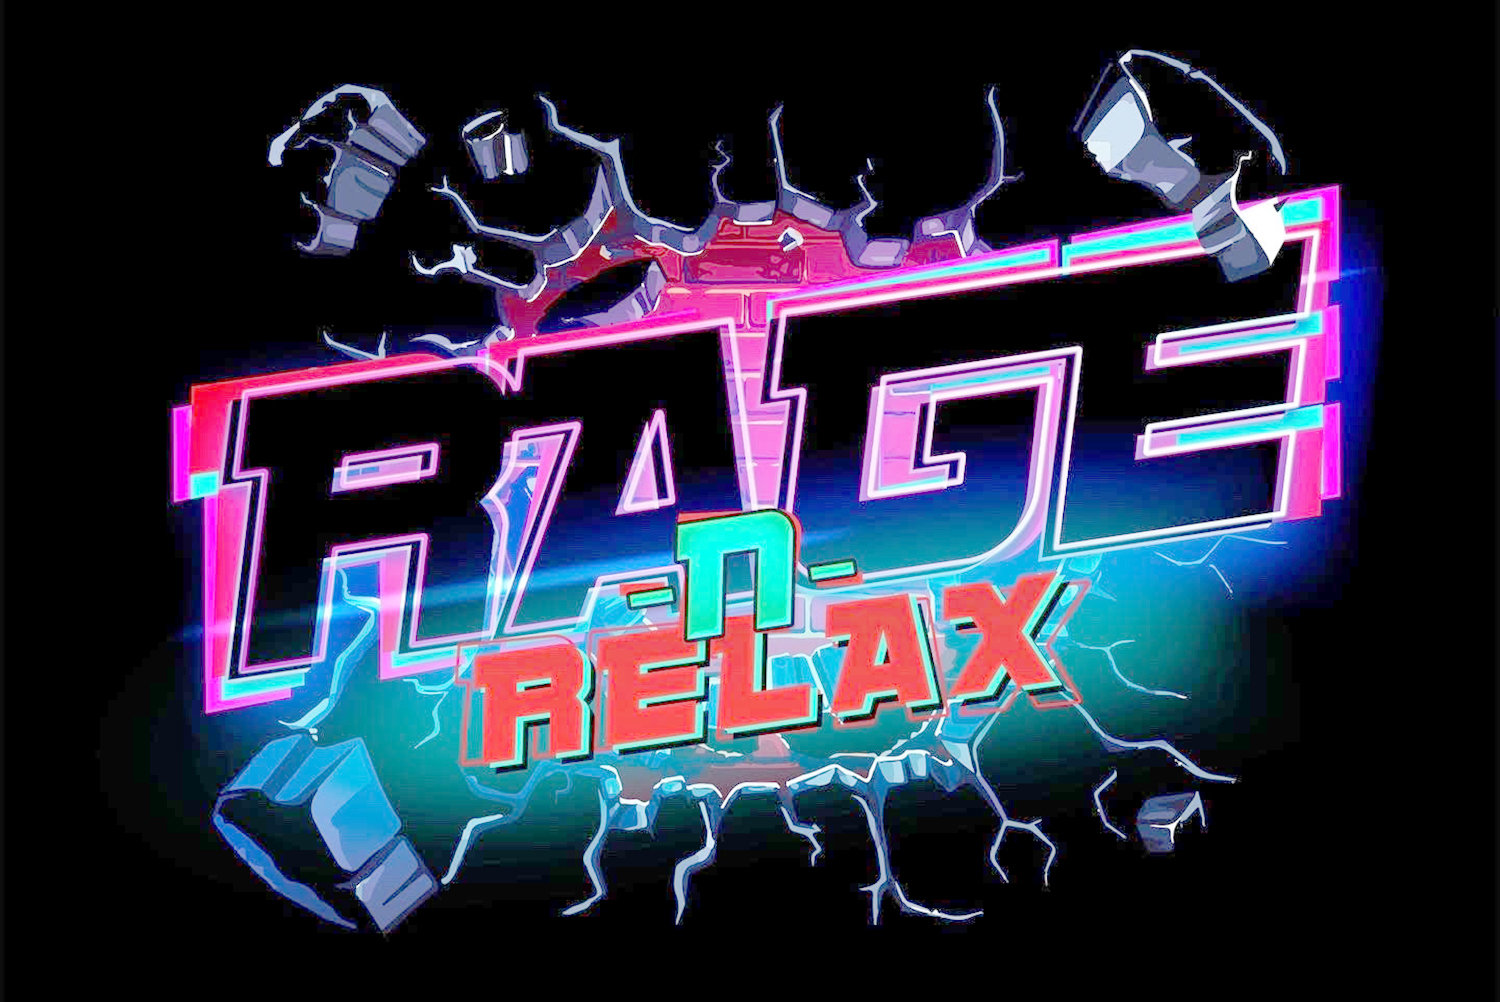 Rage N Relax is the new smash and paint splatter venue on Route 28 north of the village of Herkimer.